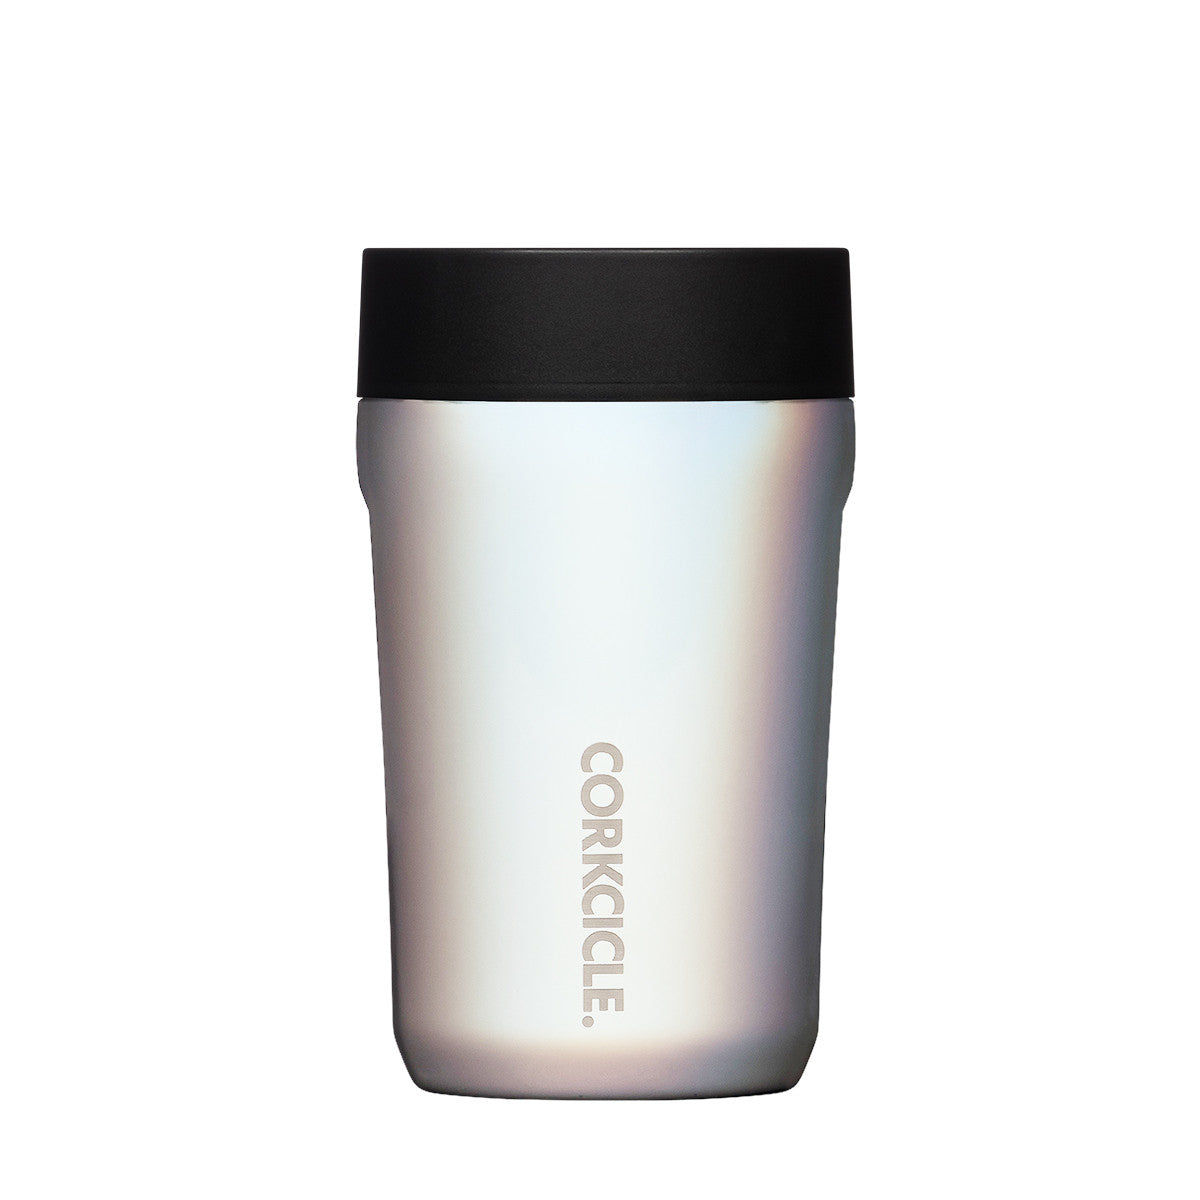 Corkcicle Commuter Cup 260ml - Prismatic Insulated Stainless Steel Cup